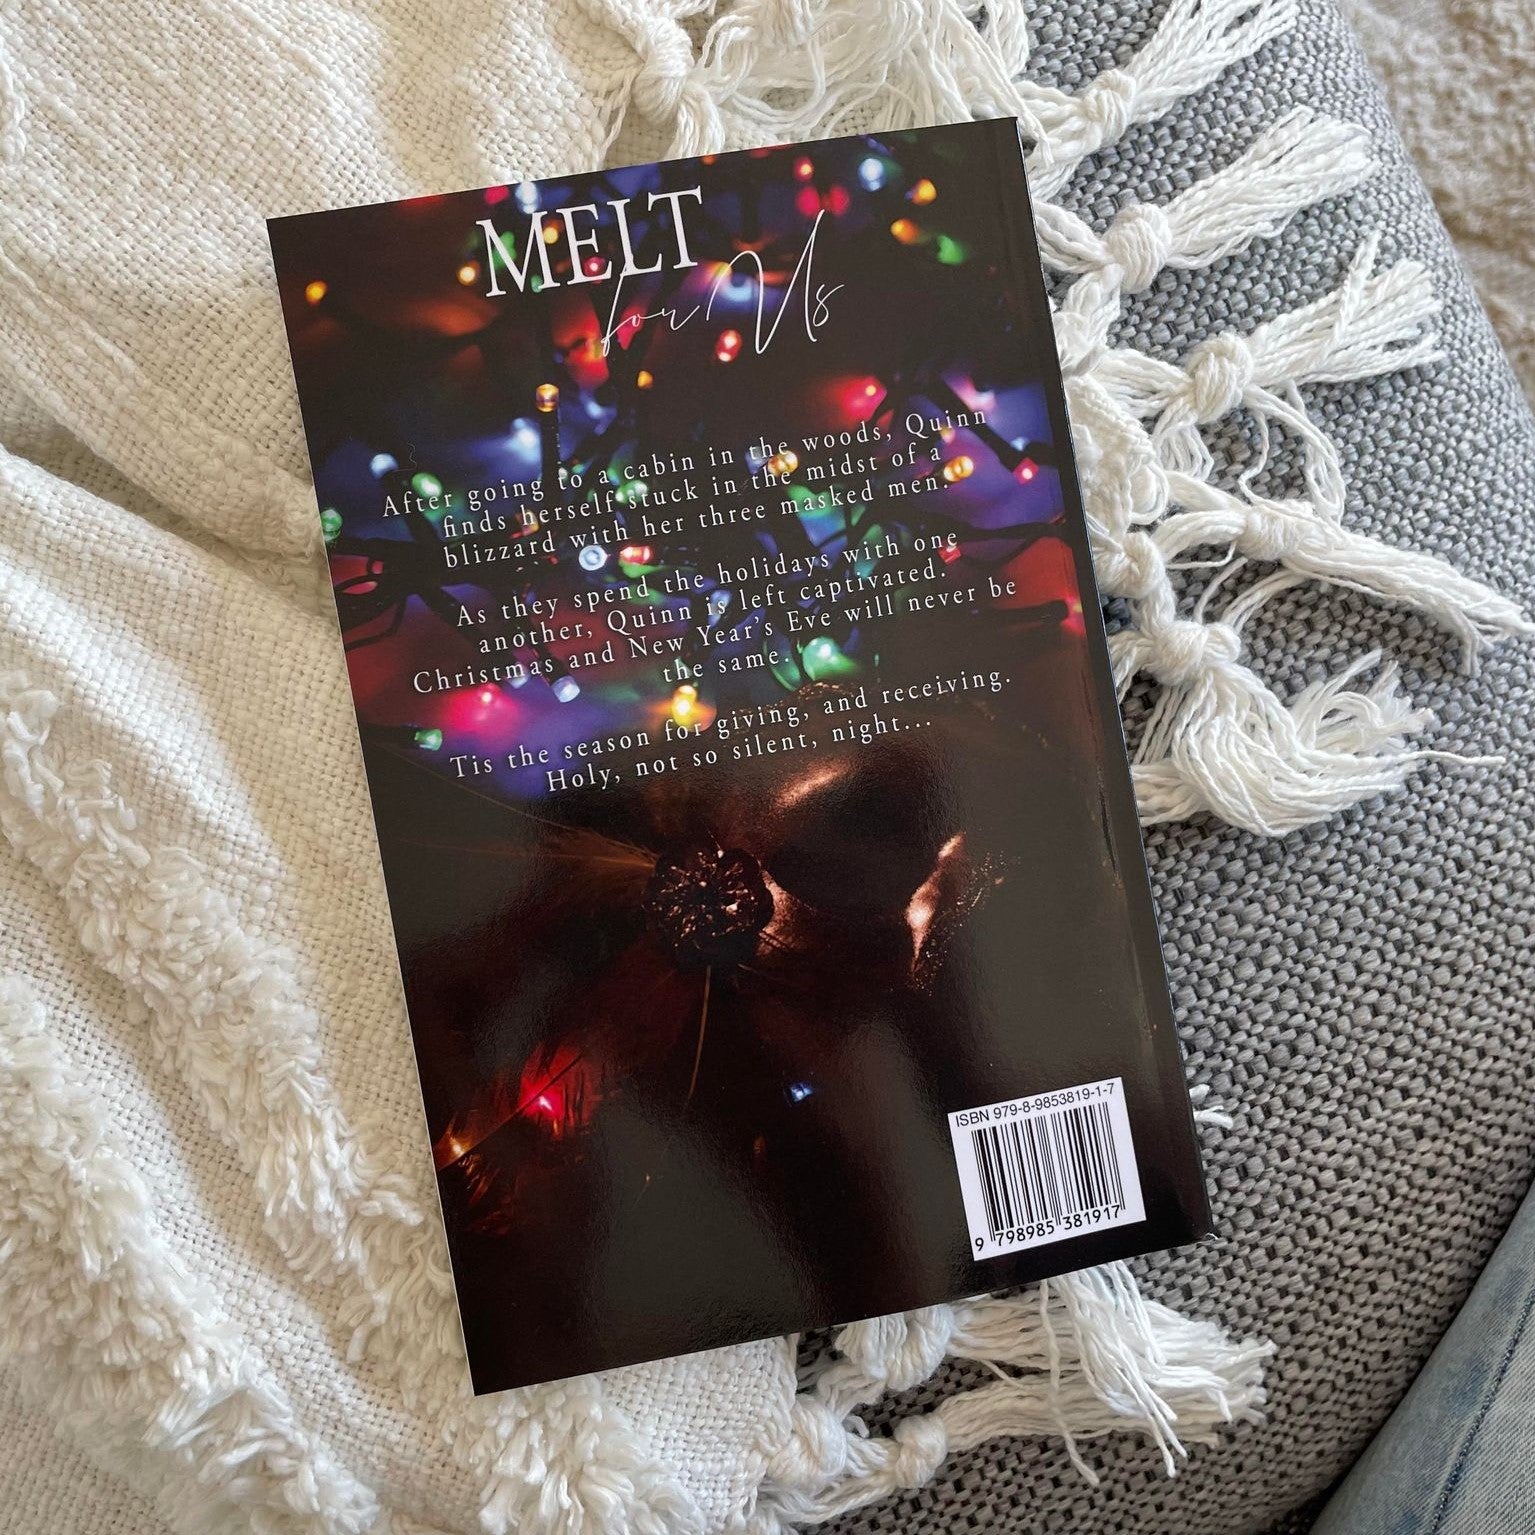 Melt For Us by Molly Doyle